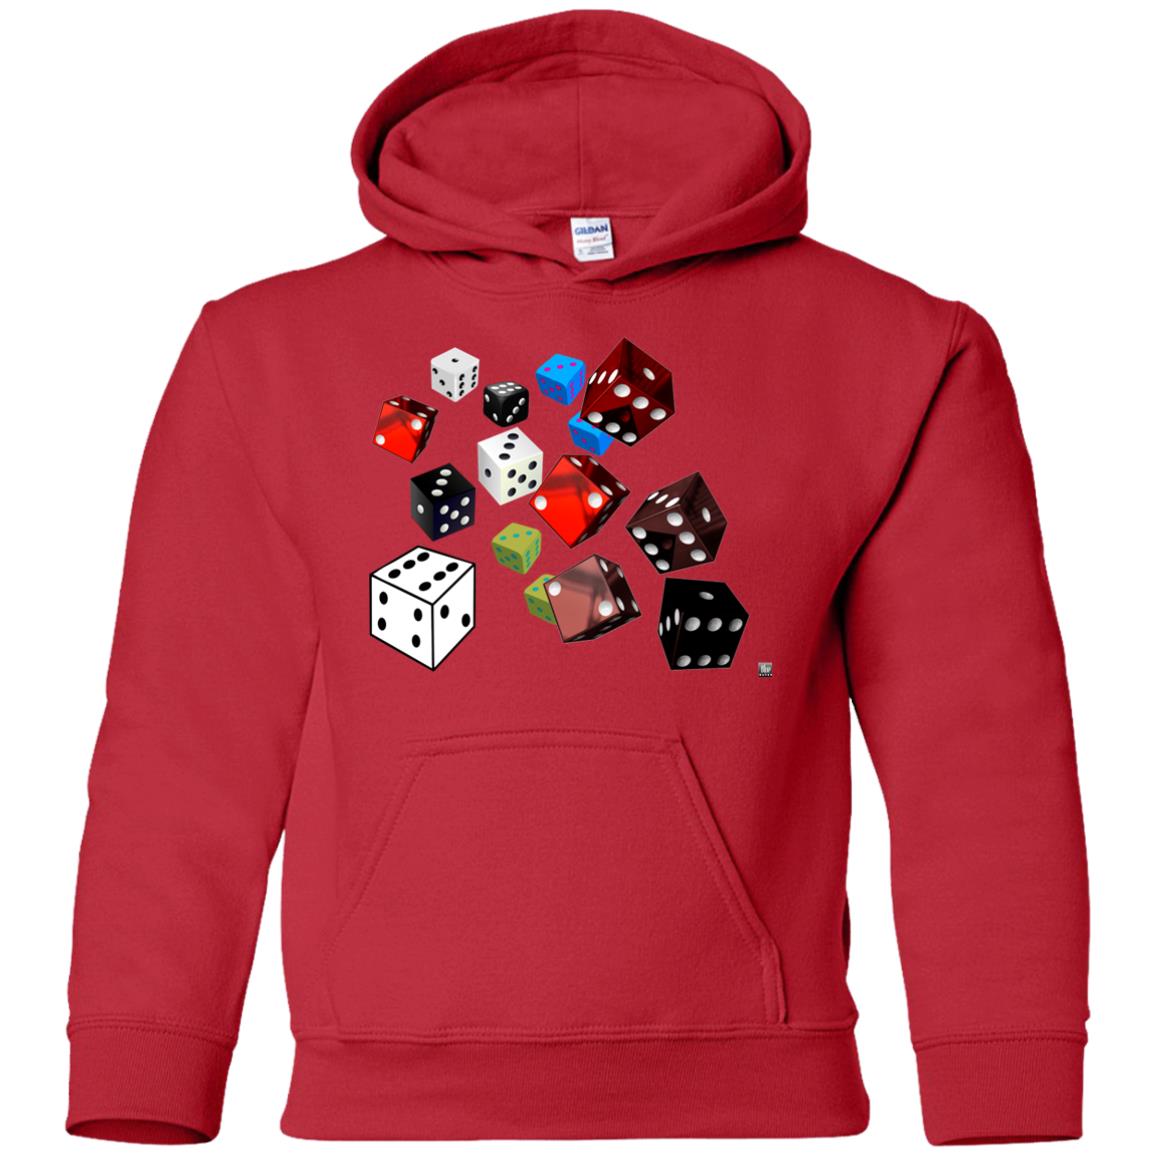 roll of the dice - Youth Hoodie